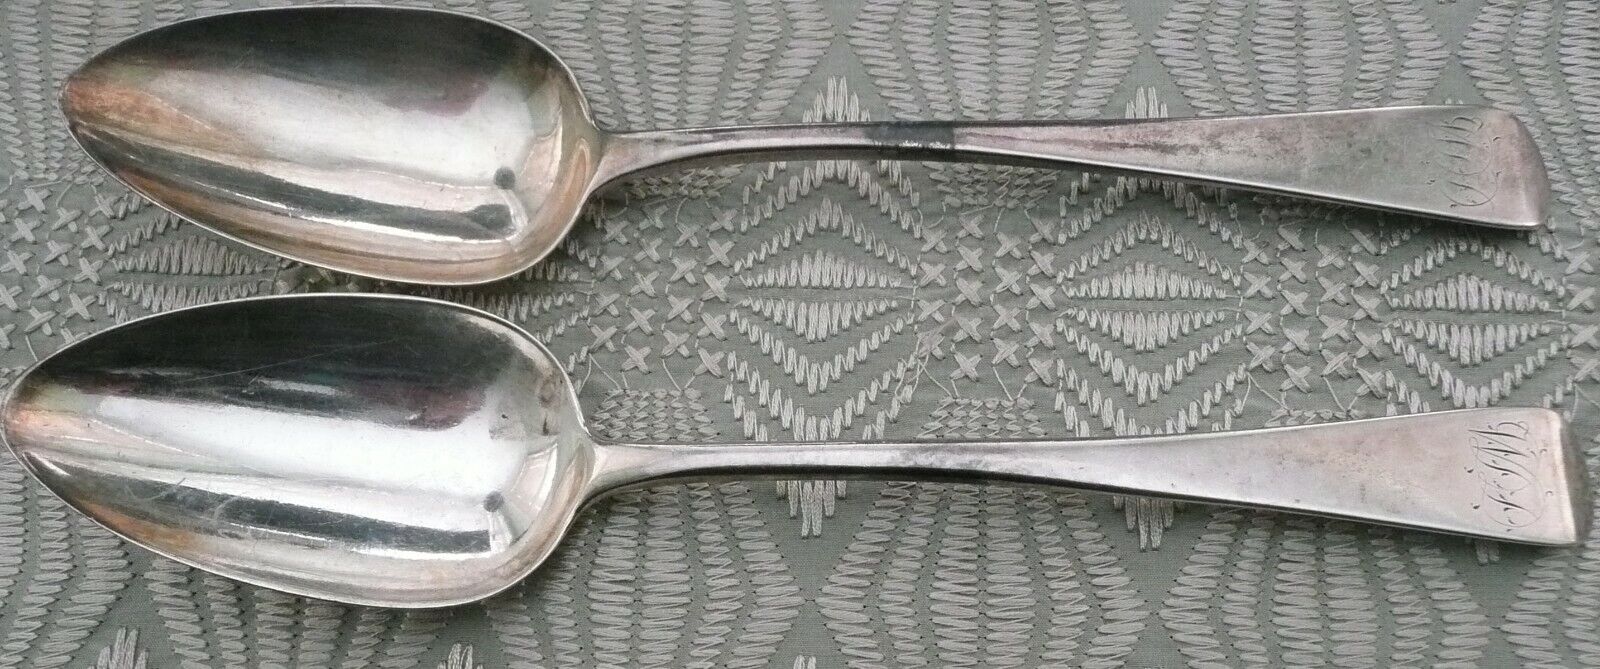 Pair of Fine Quality George III period Solid Silver Serving Spoon, English 1789.